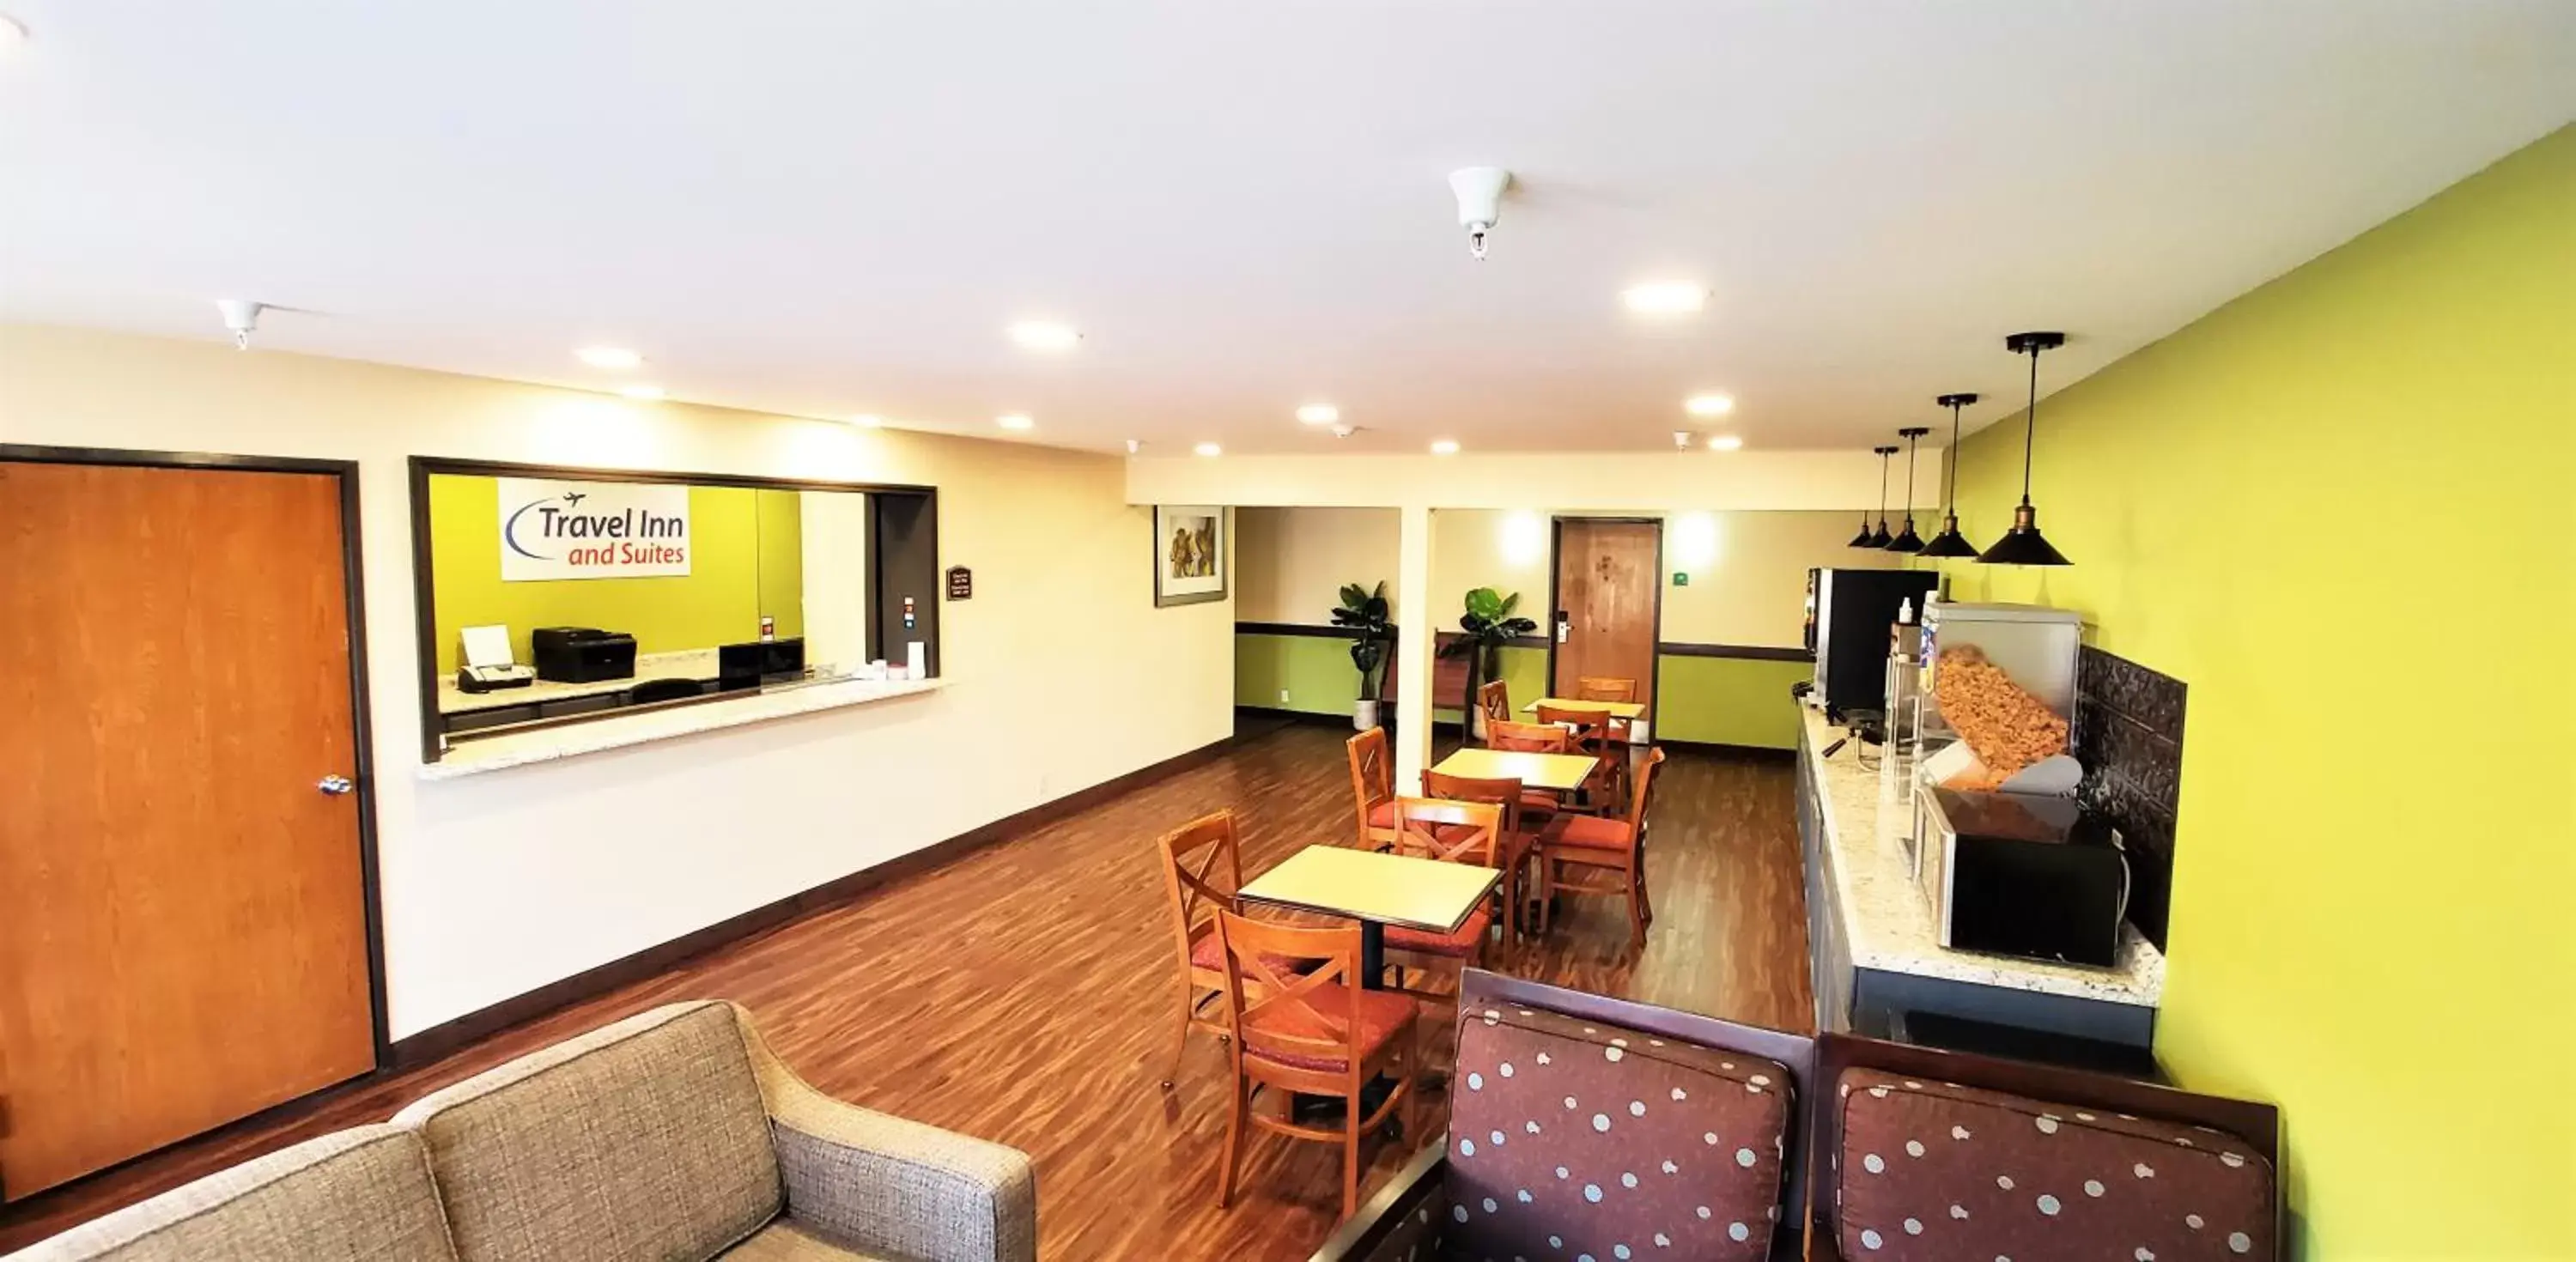 Lobby or reception, Lobby/Reception in Travel Inn and Suites